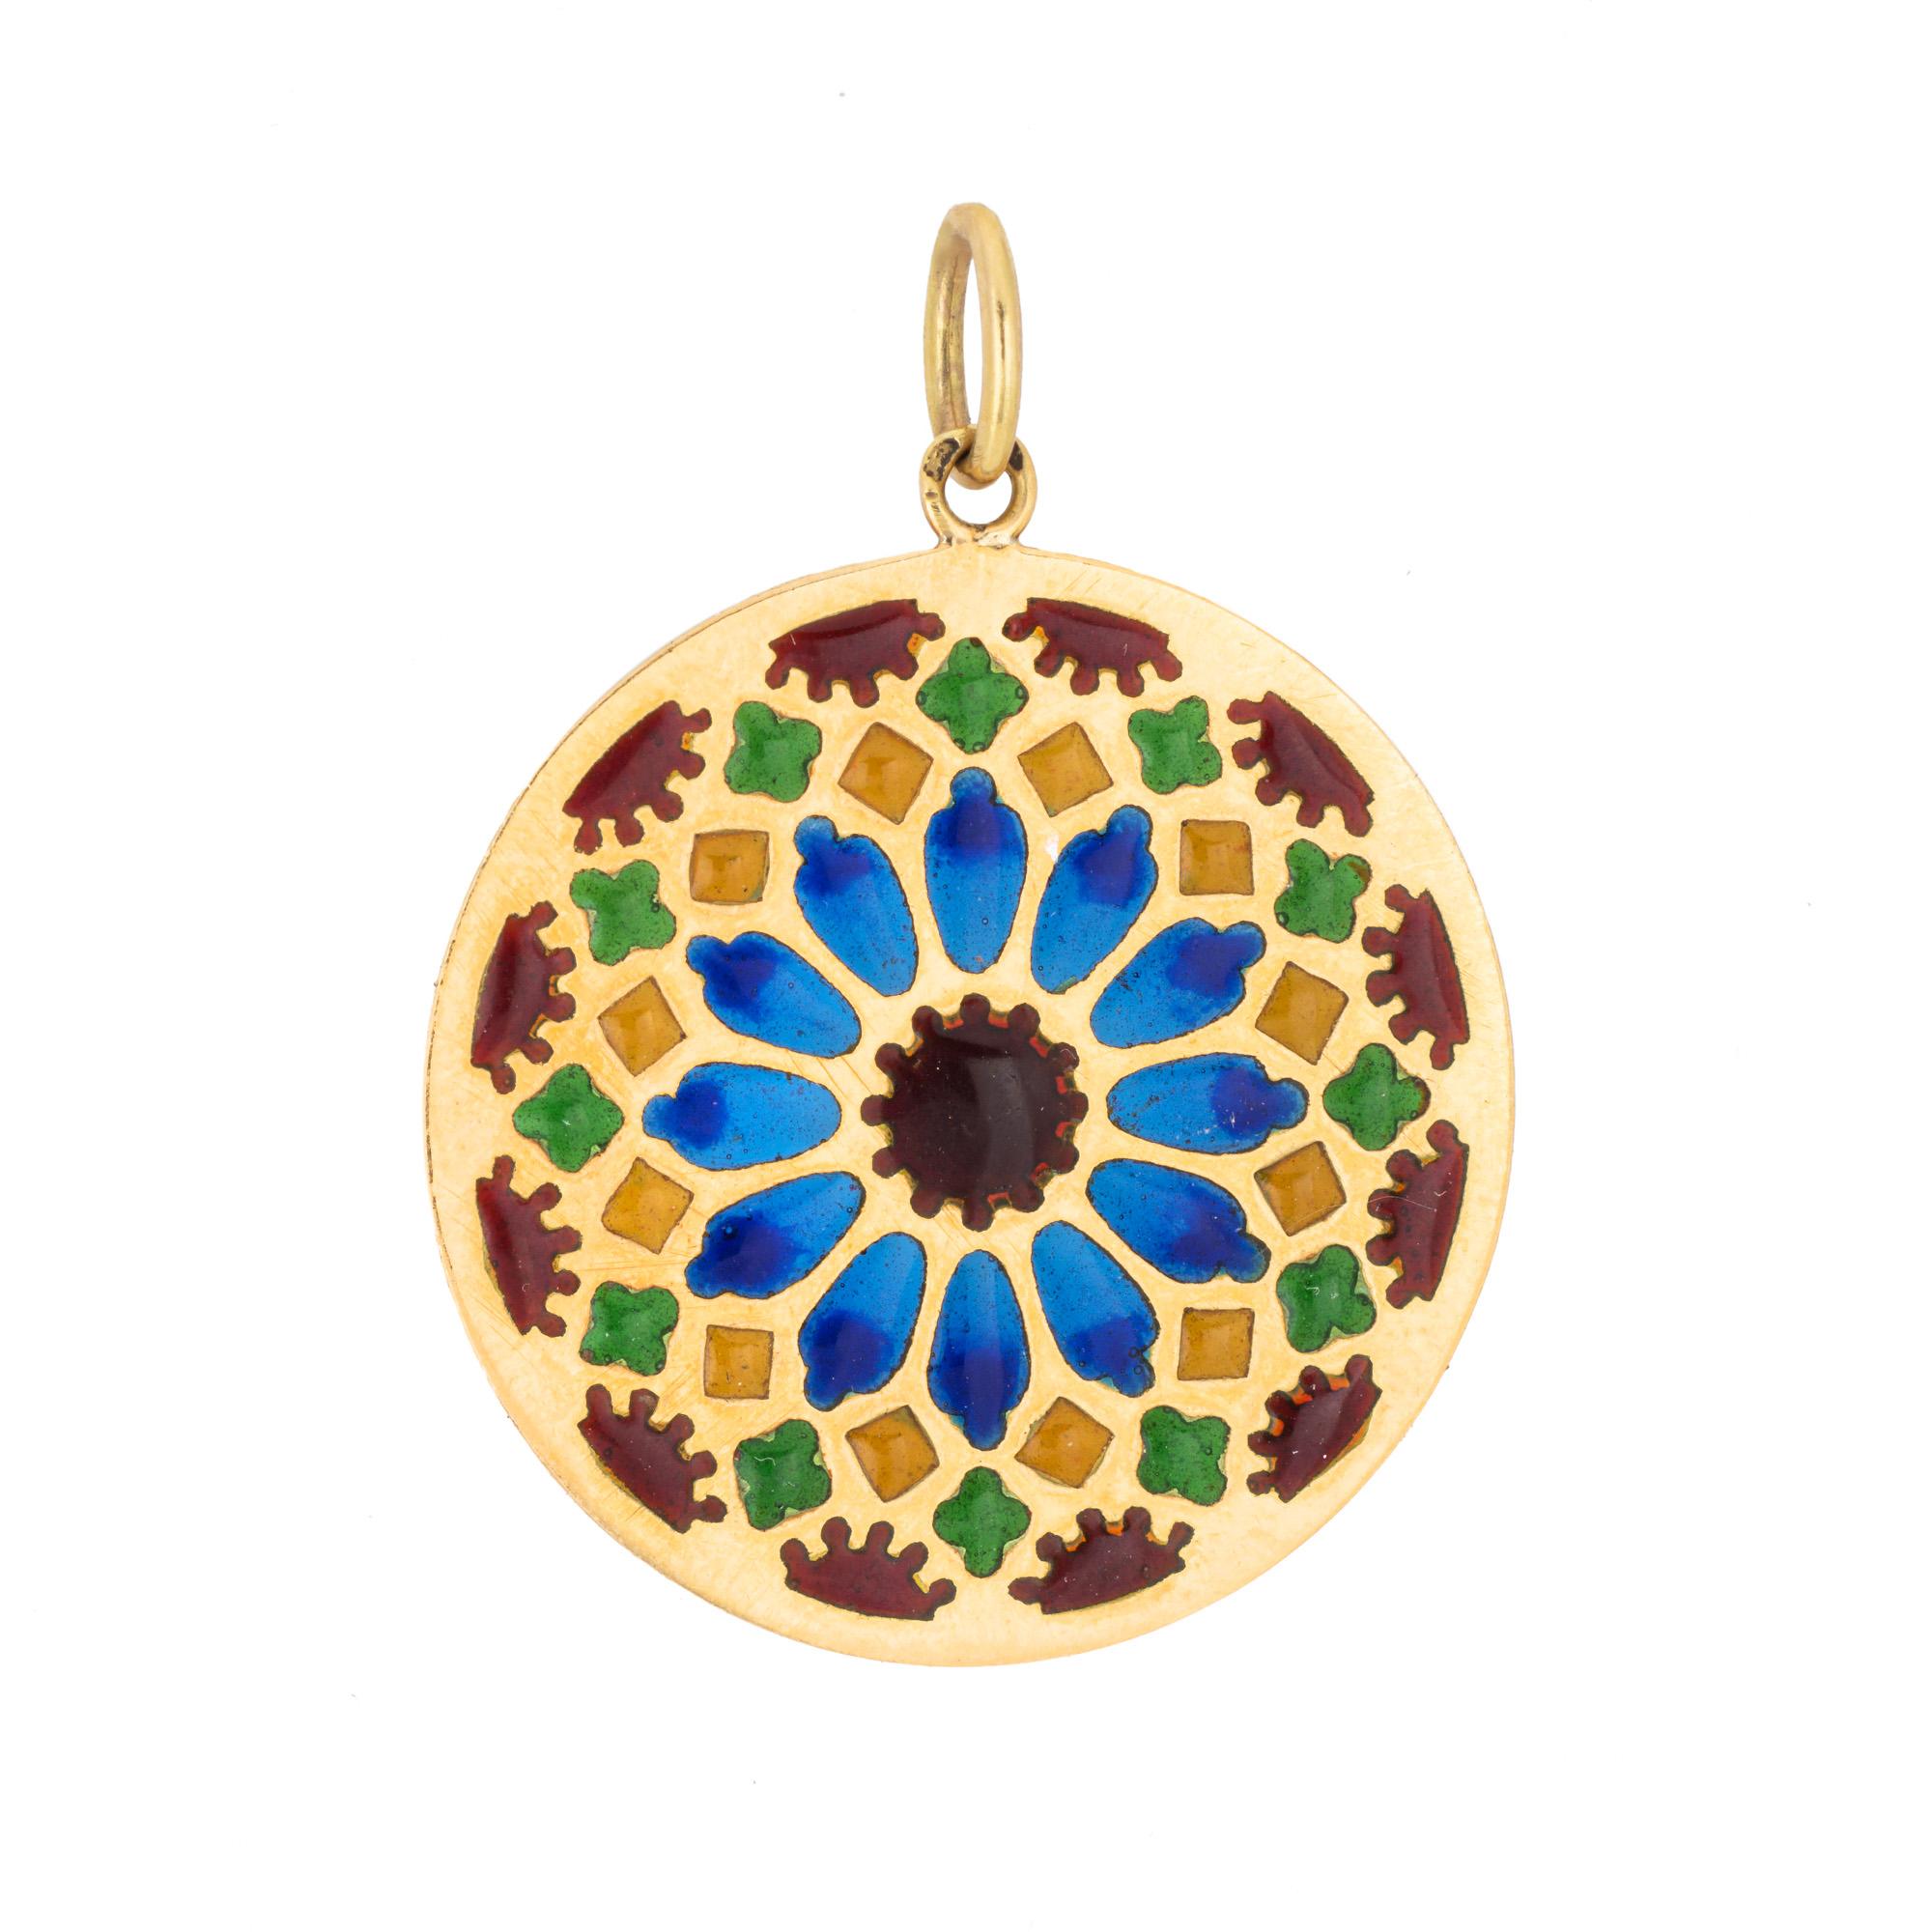 Finely detailed French plique a jour pendant (circa 1920s to 1930s), crafted in 18 karat yellow gold.

A kaleidoscope of colors adorn the pendant in shades of red, blue, yellow and green.
 
Plique a jour is a French term for 'letting in daylight'.